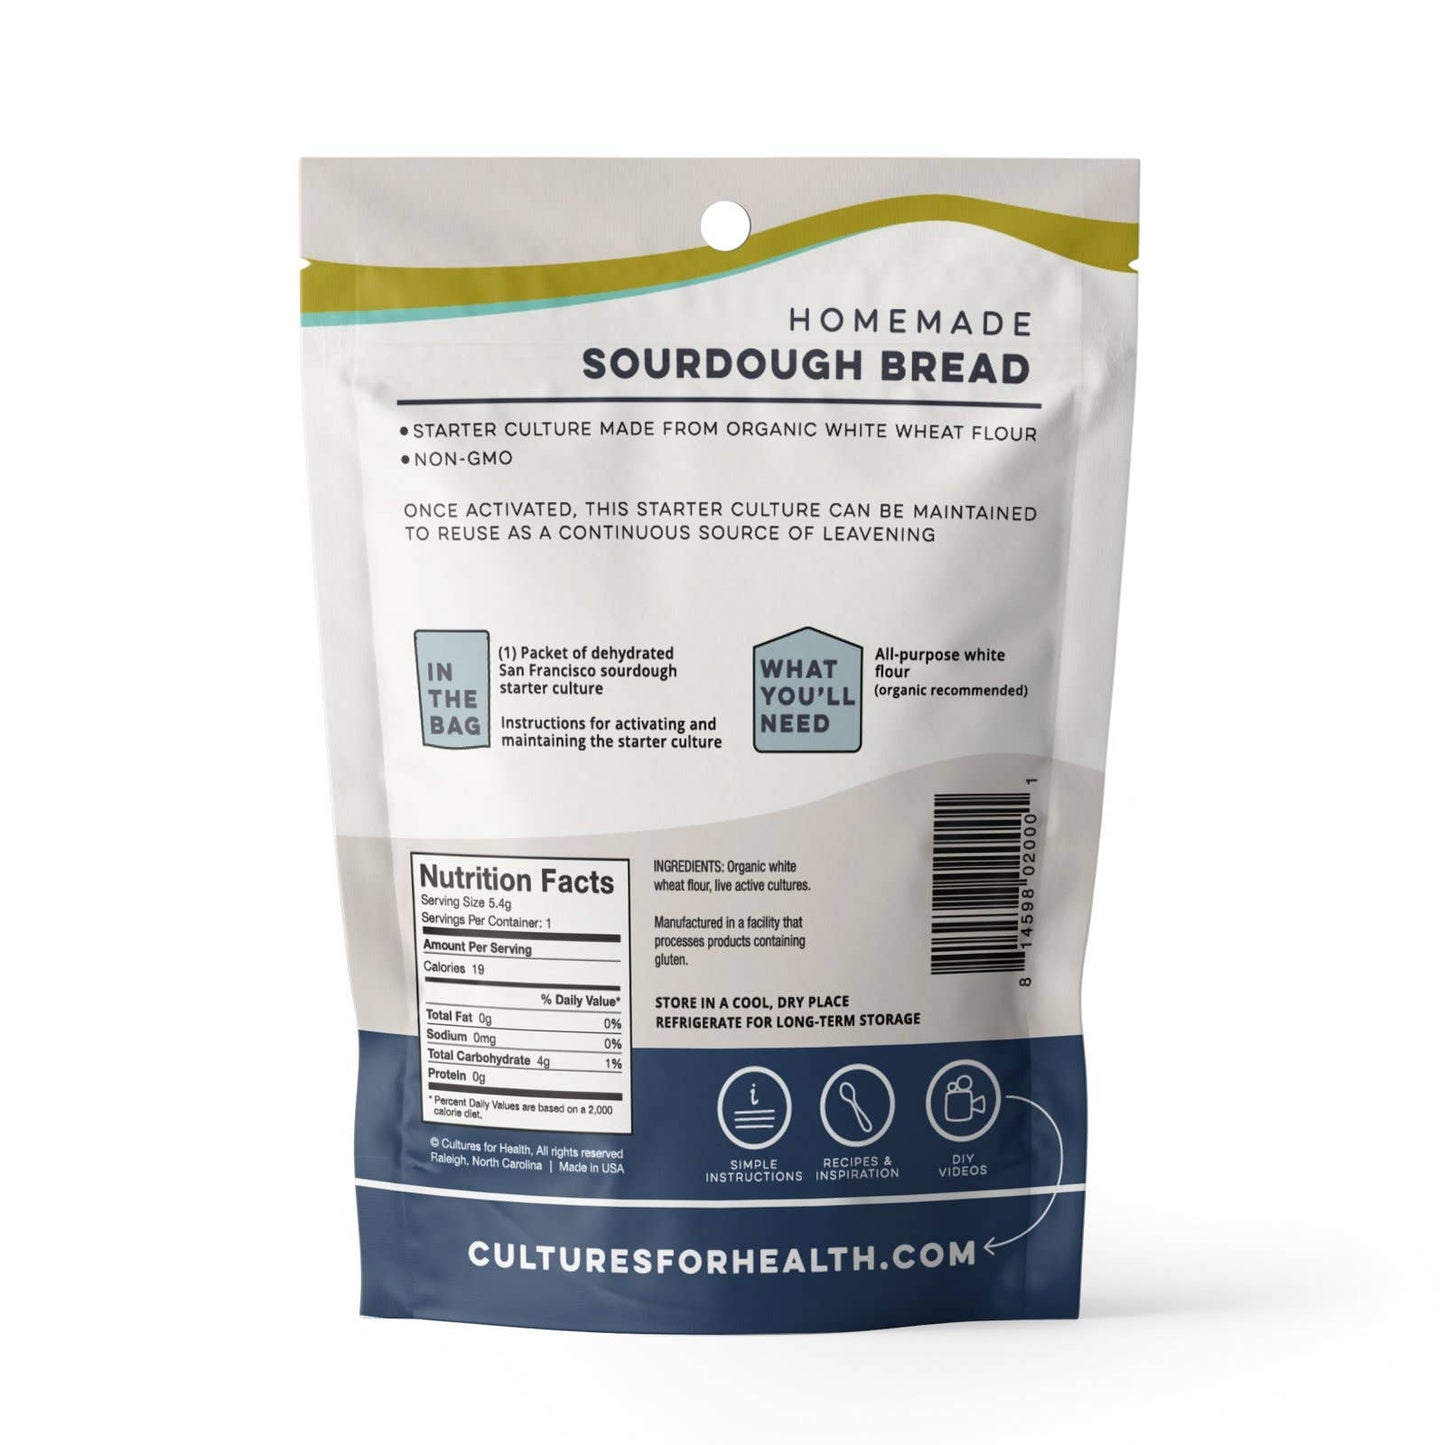 San Francisco Sourdough Starter by Cultures for Health